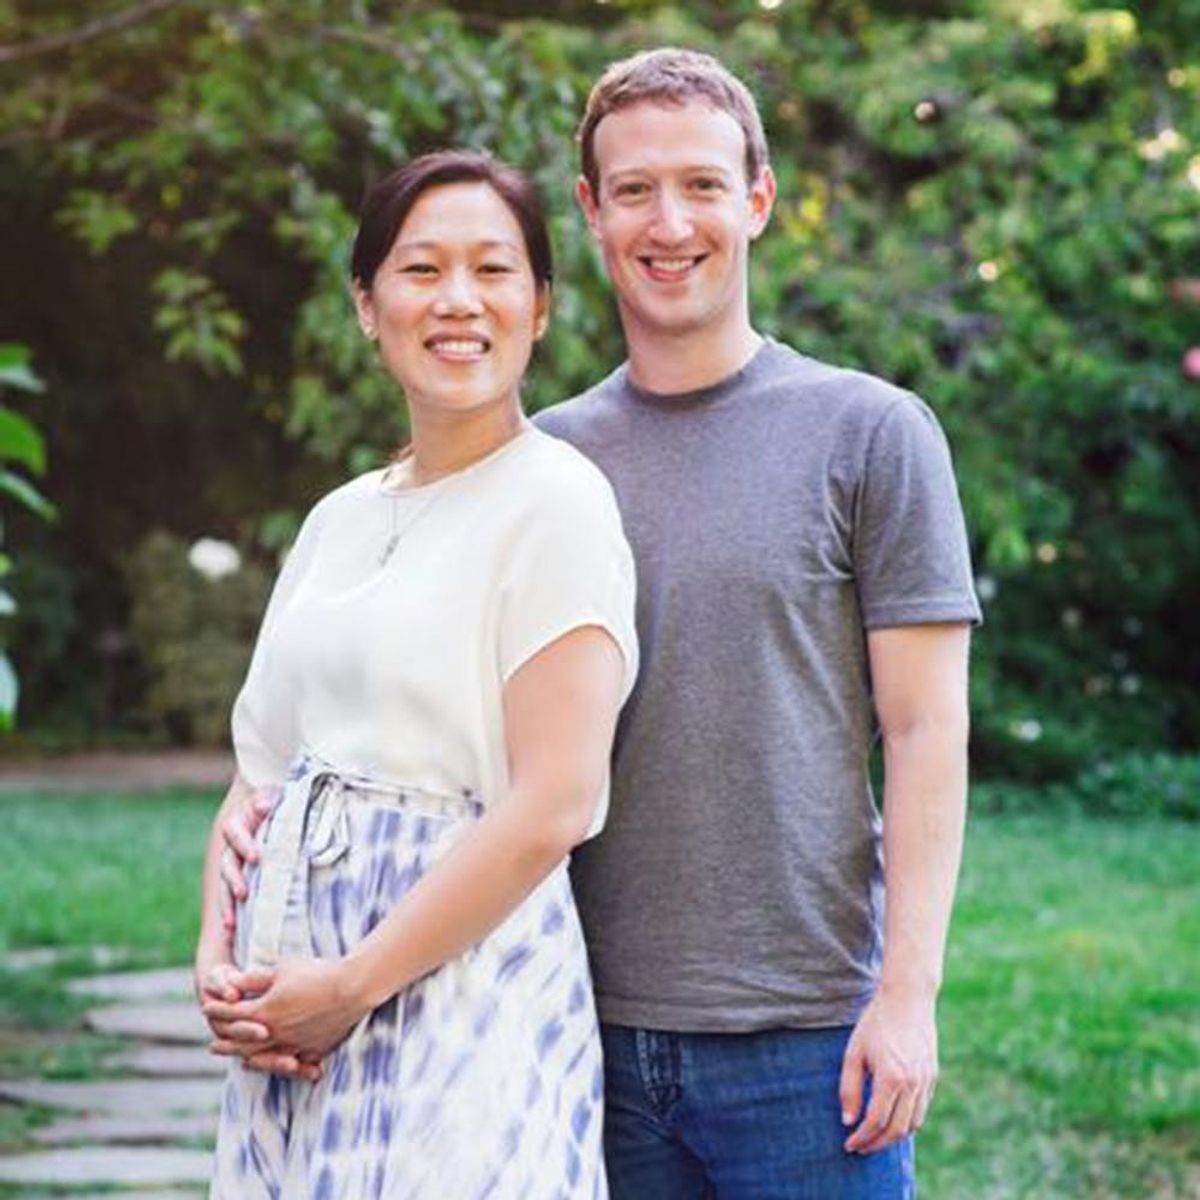 Why Mark Zuckerberg’s Touching Pregnancy Announcement Deserves a “Like”